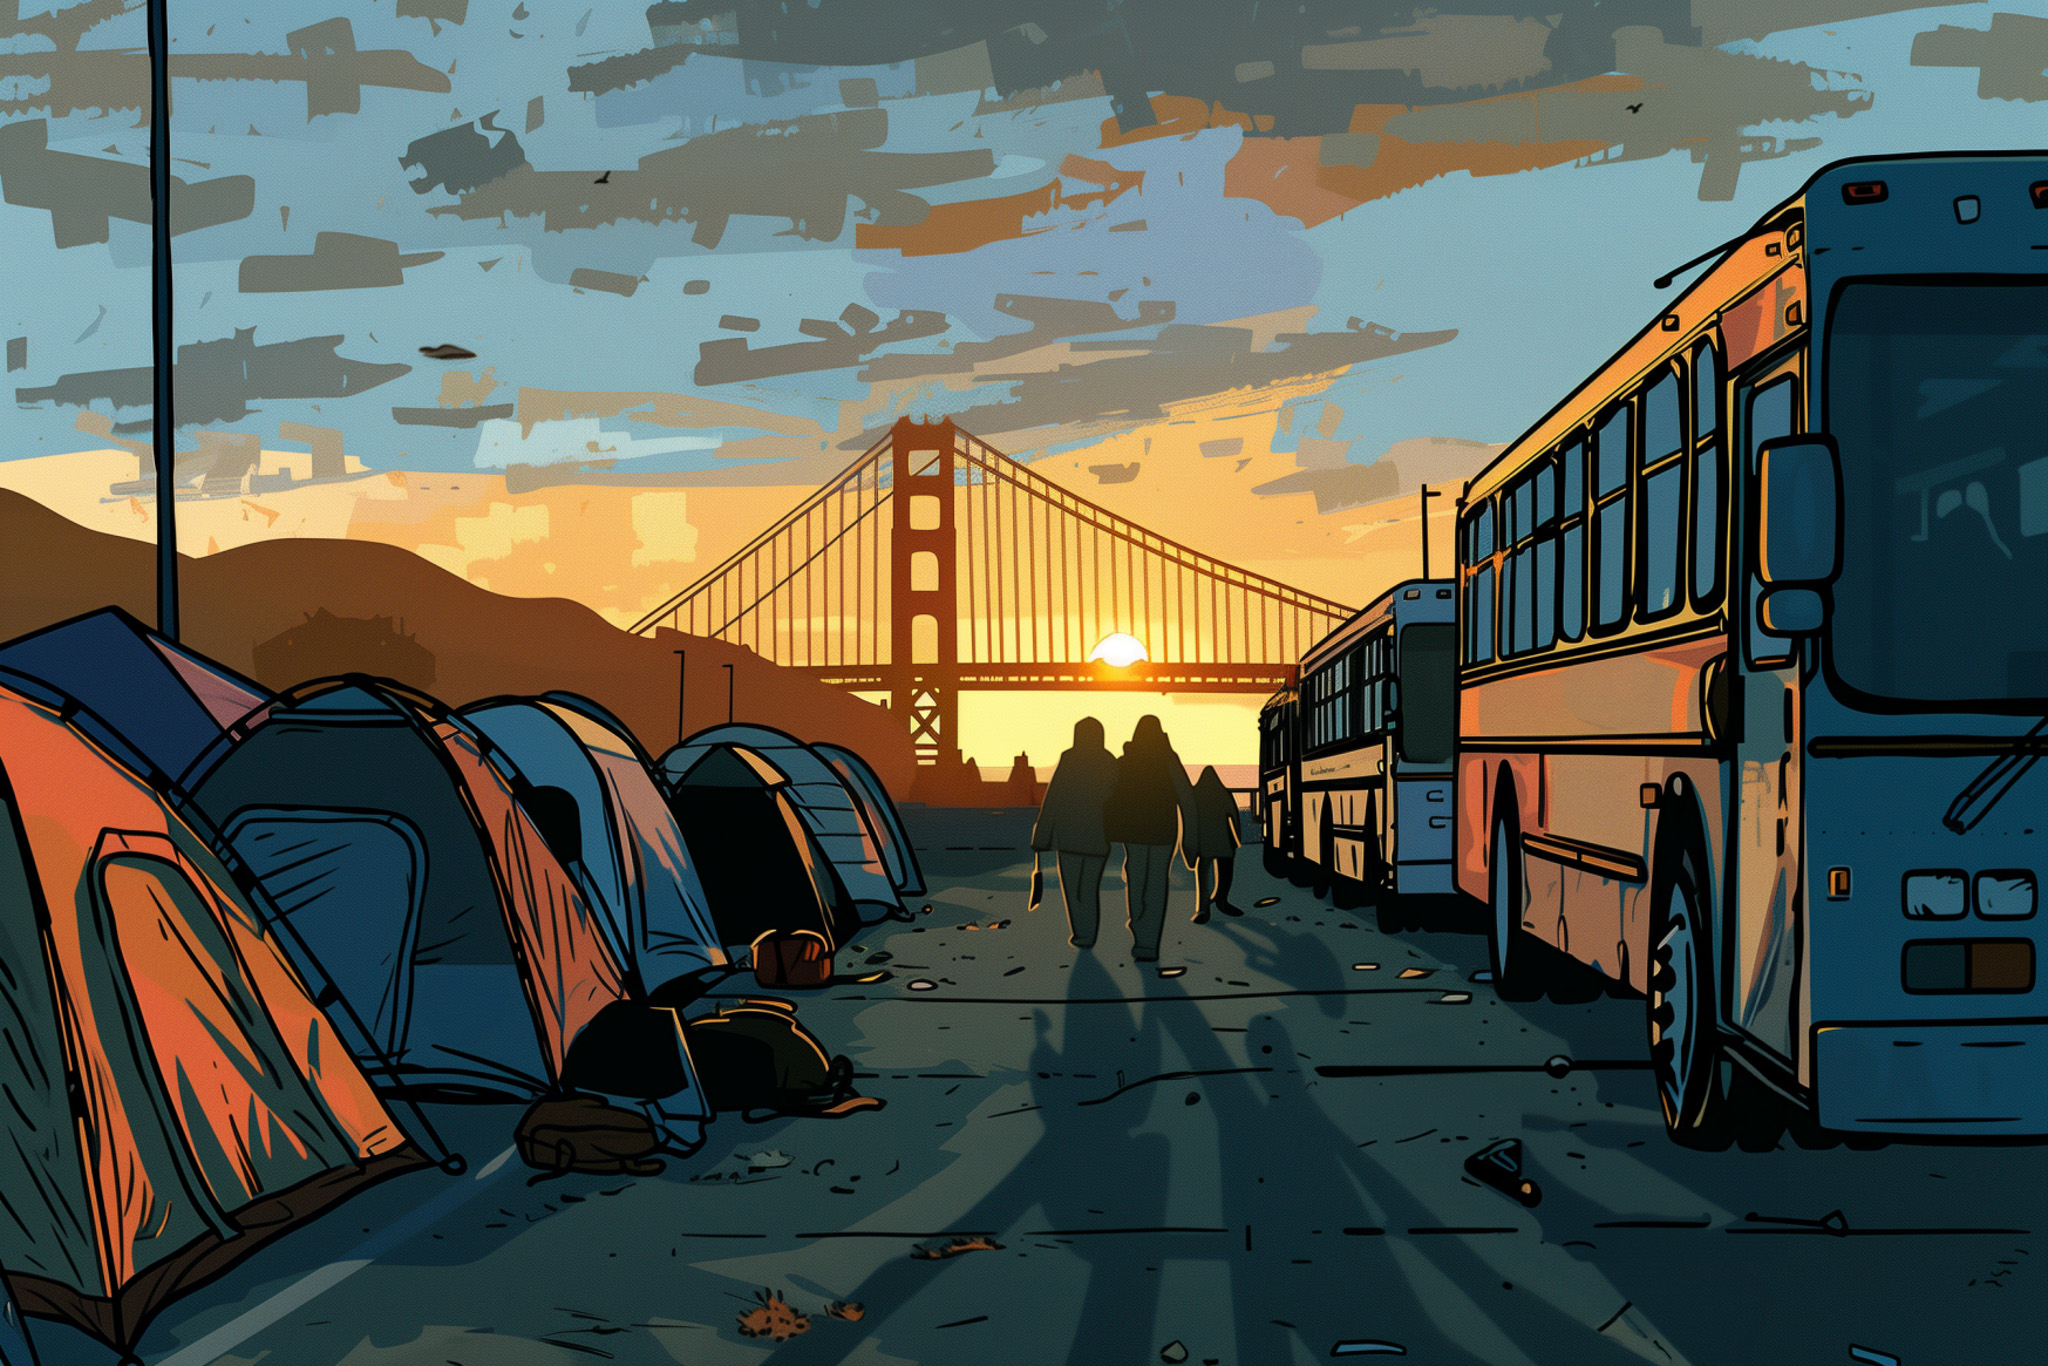 Illustration: sunset behind a bridge, tents lining a road, two people walking, and parked buses in the foreground.